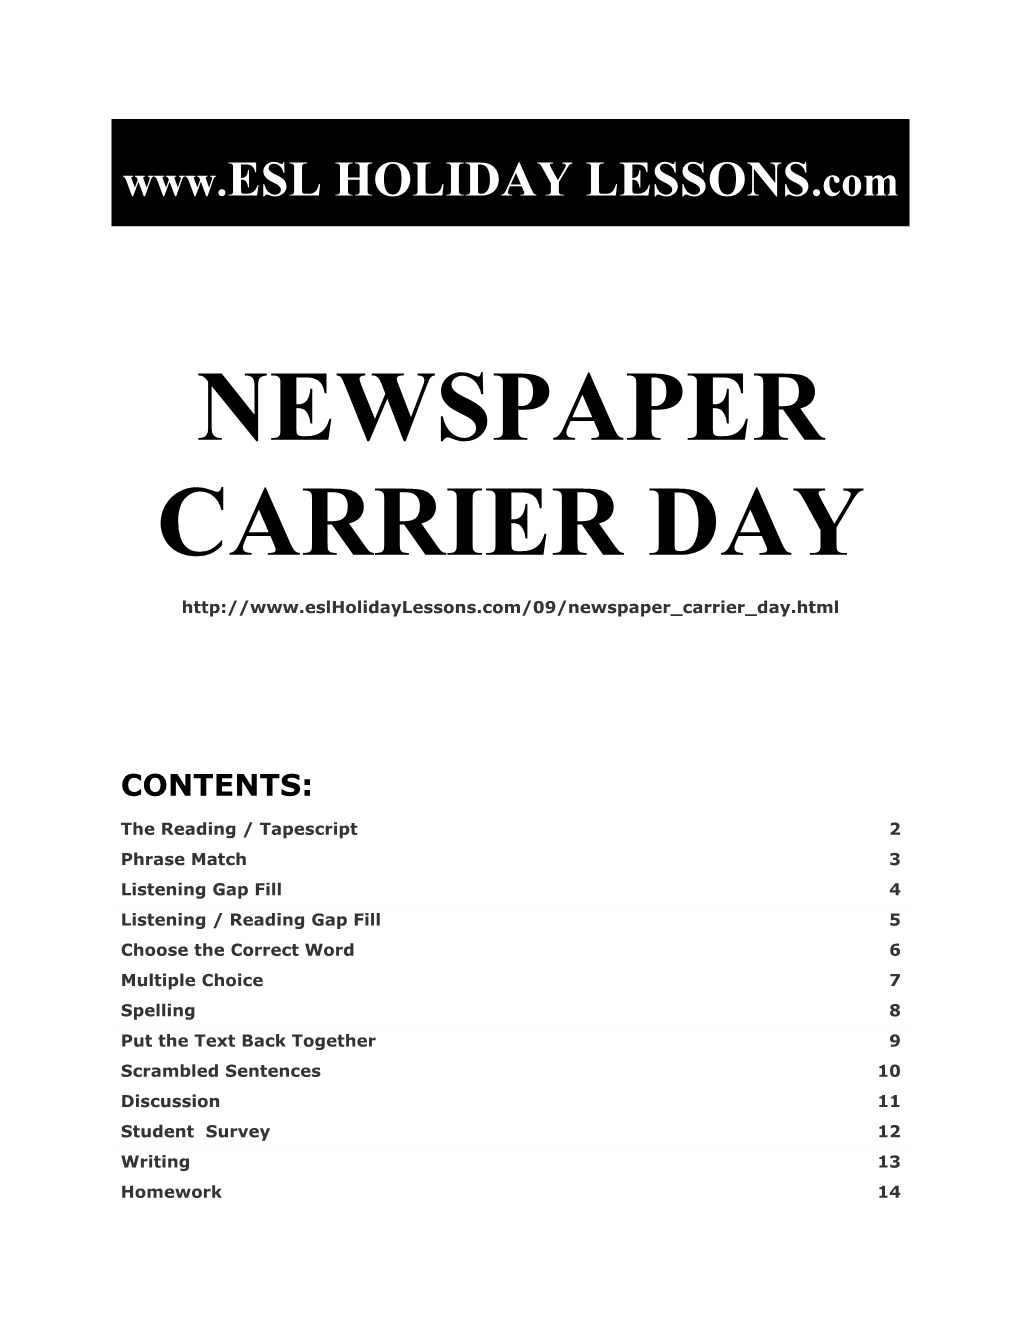 Holiday Lessons - Newspaper Carrier Day